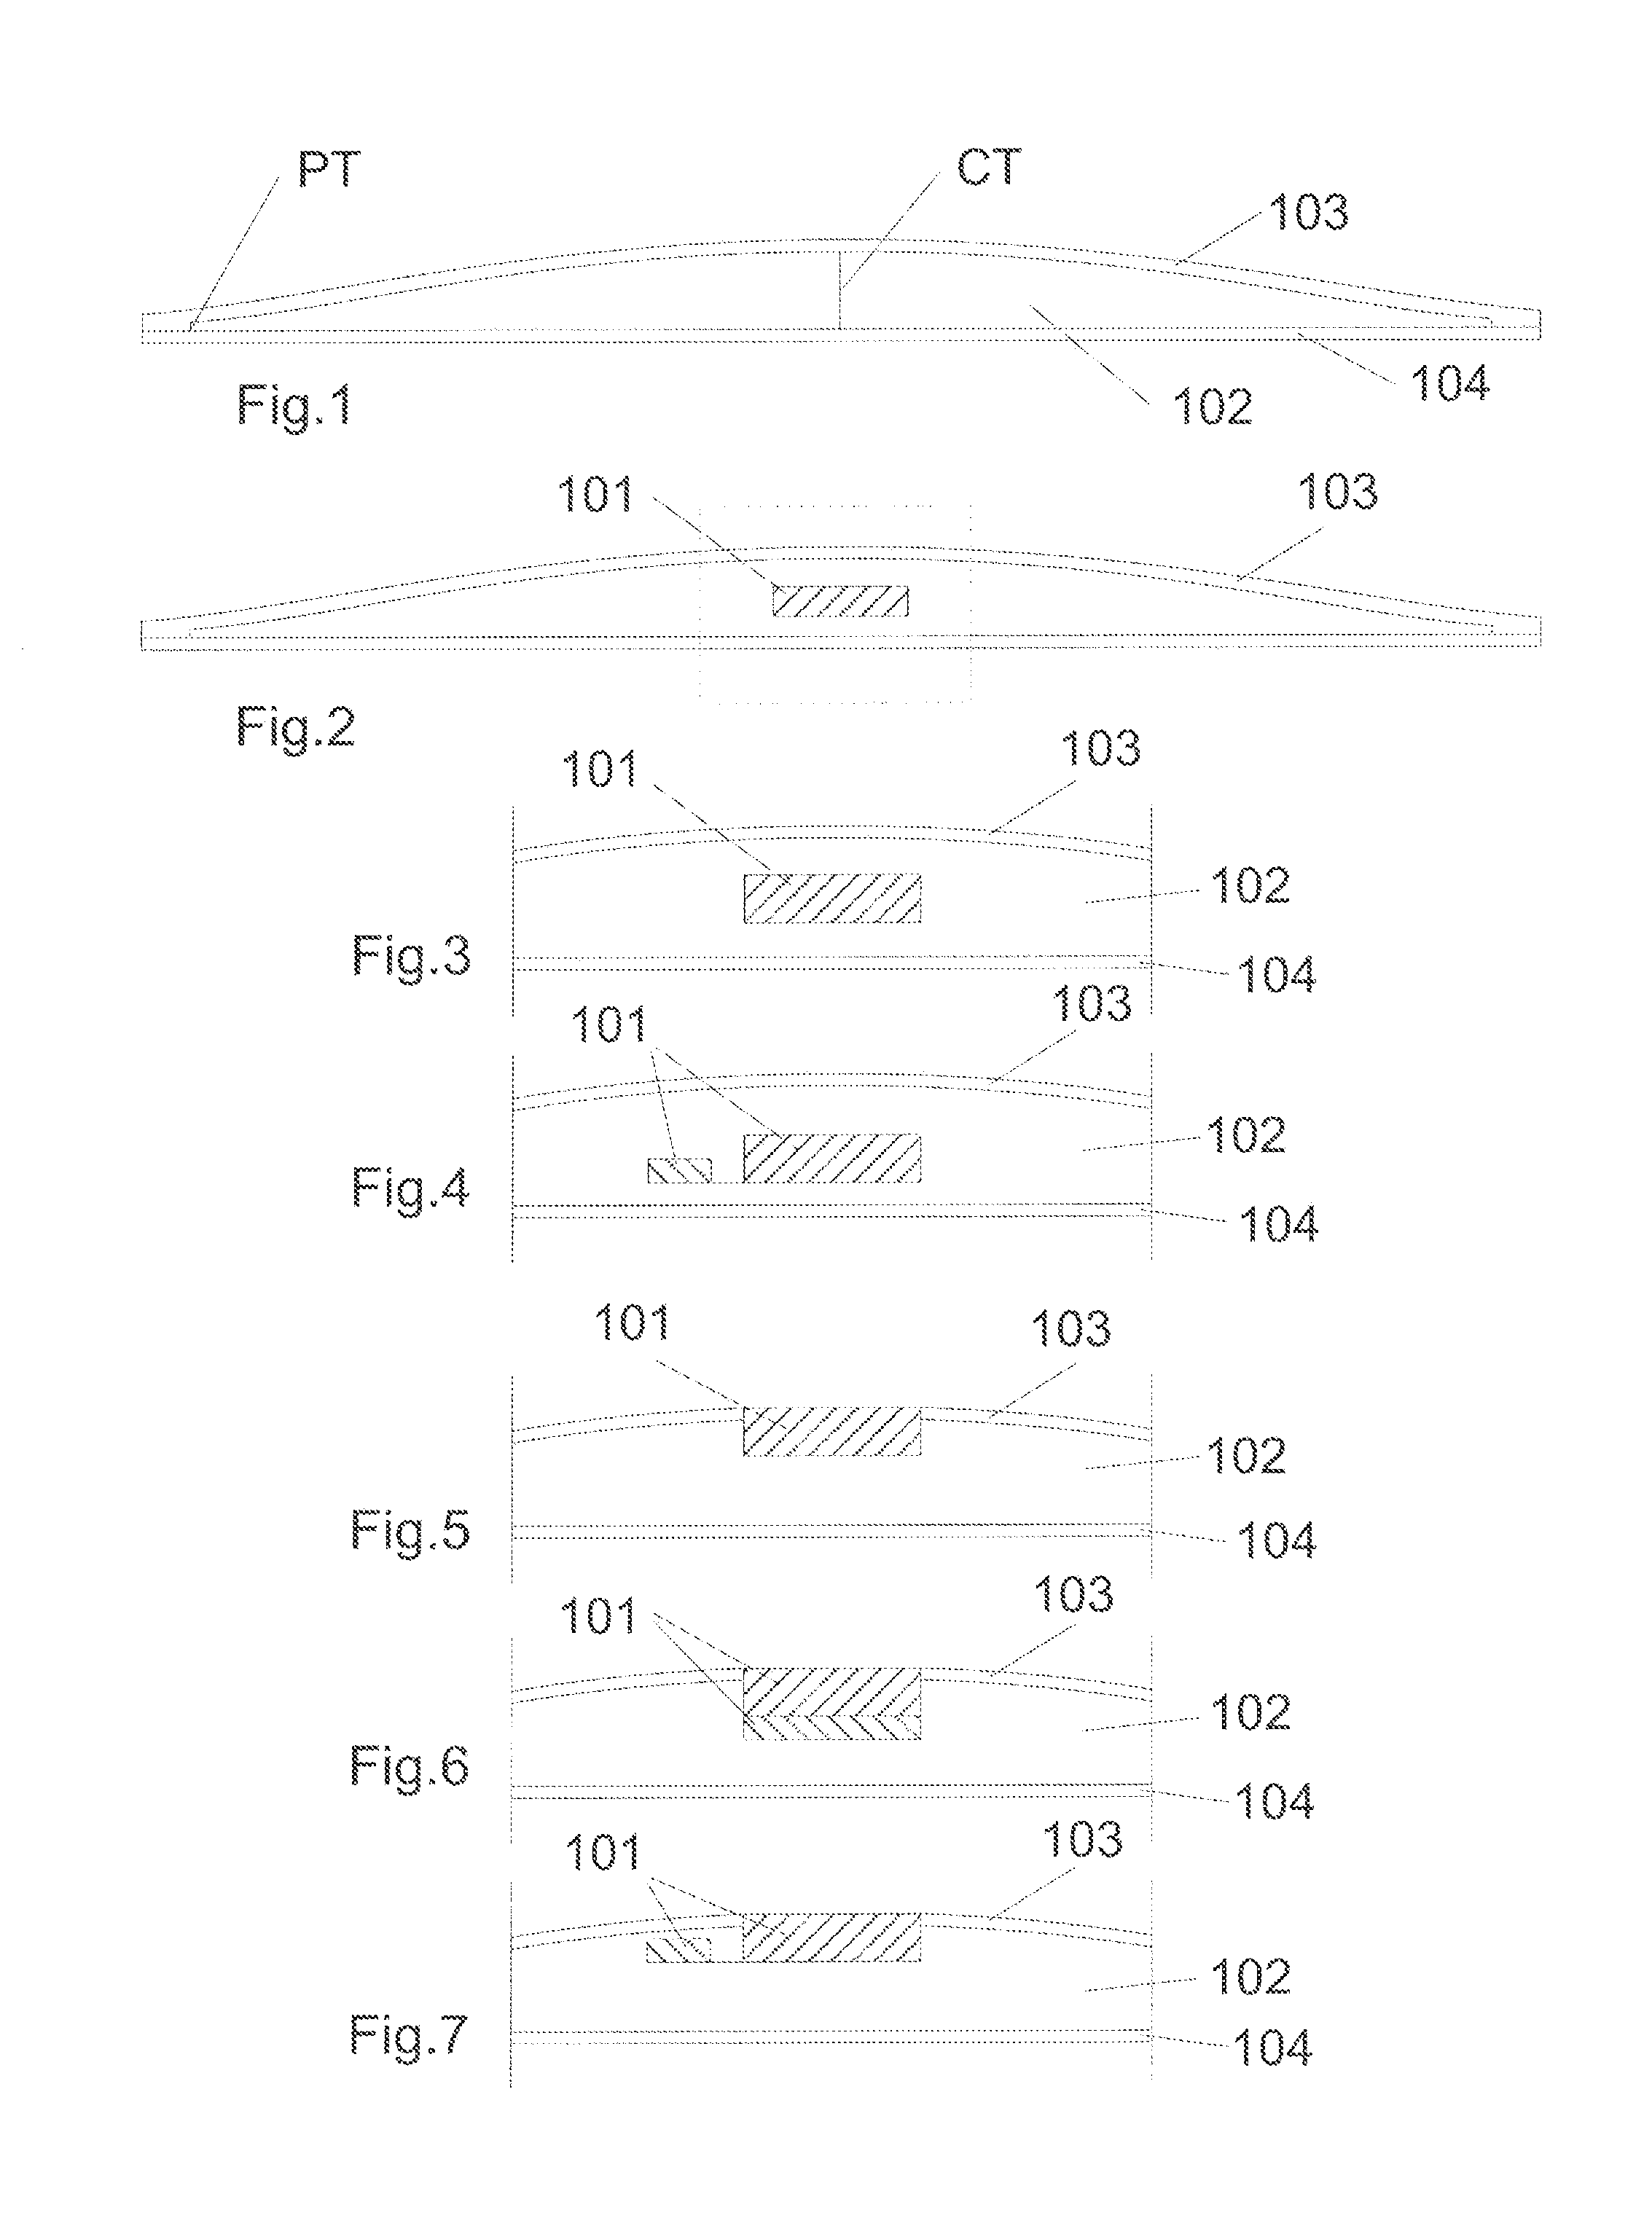 Three-dimensional adhesive device having a microelectronic system embedded therein